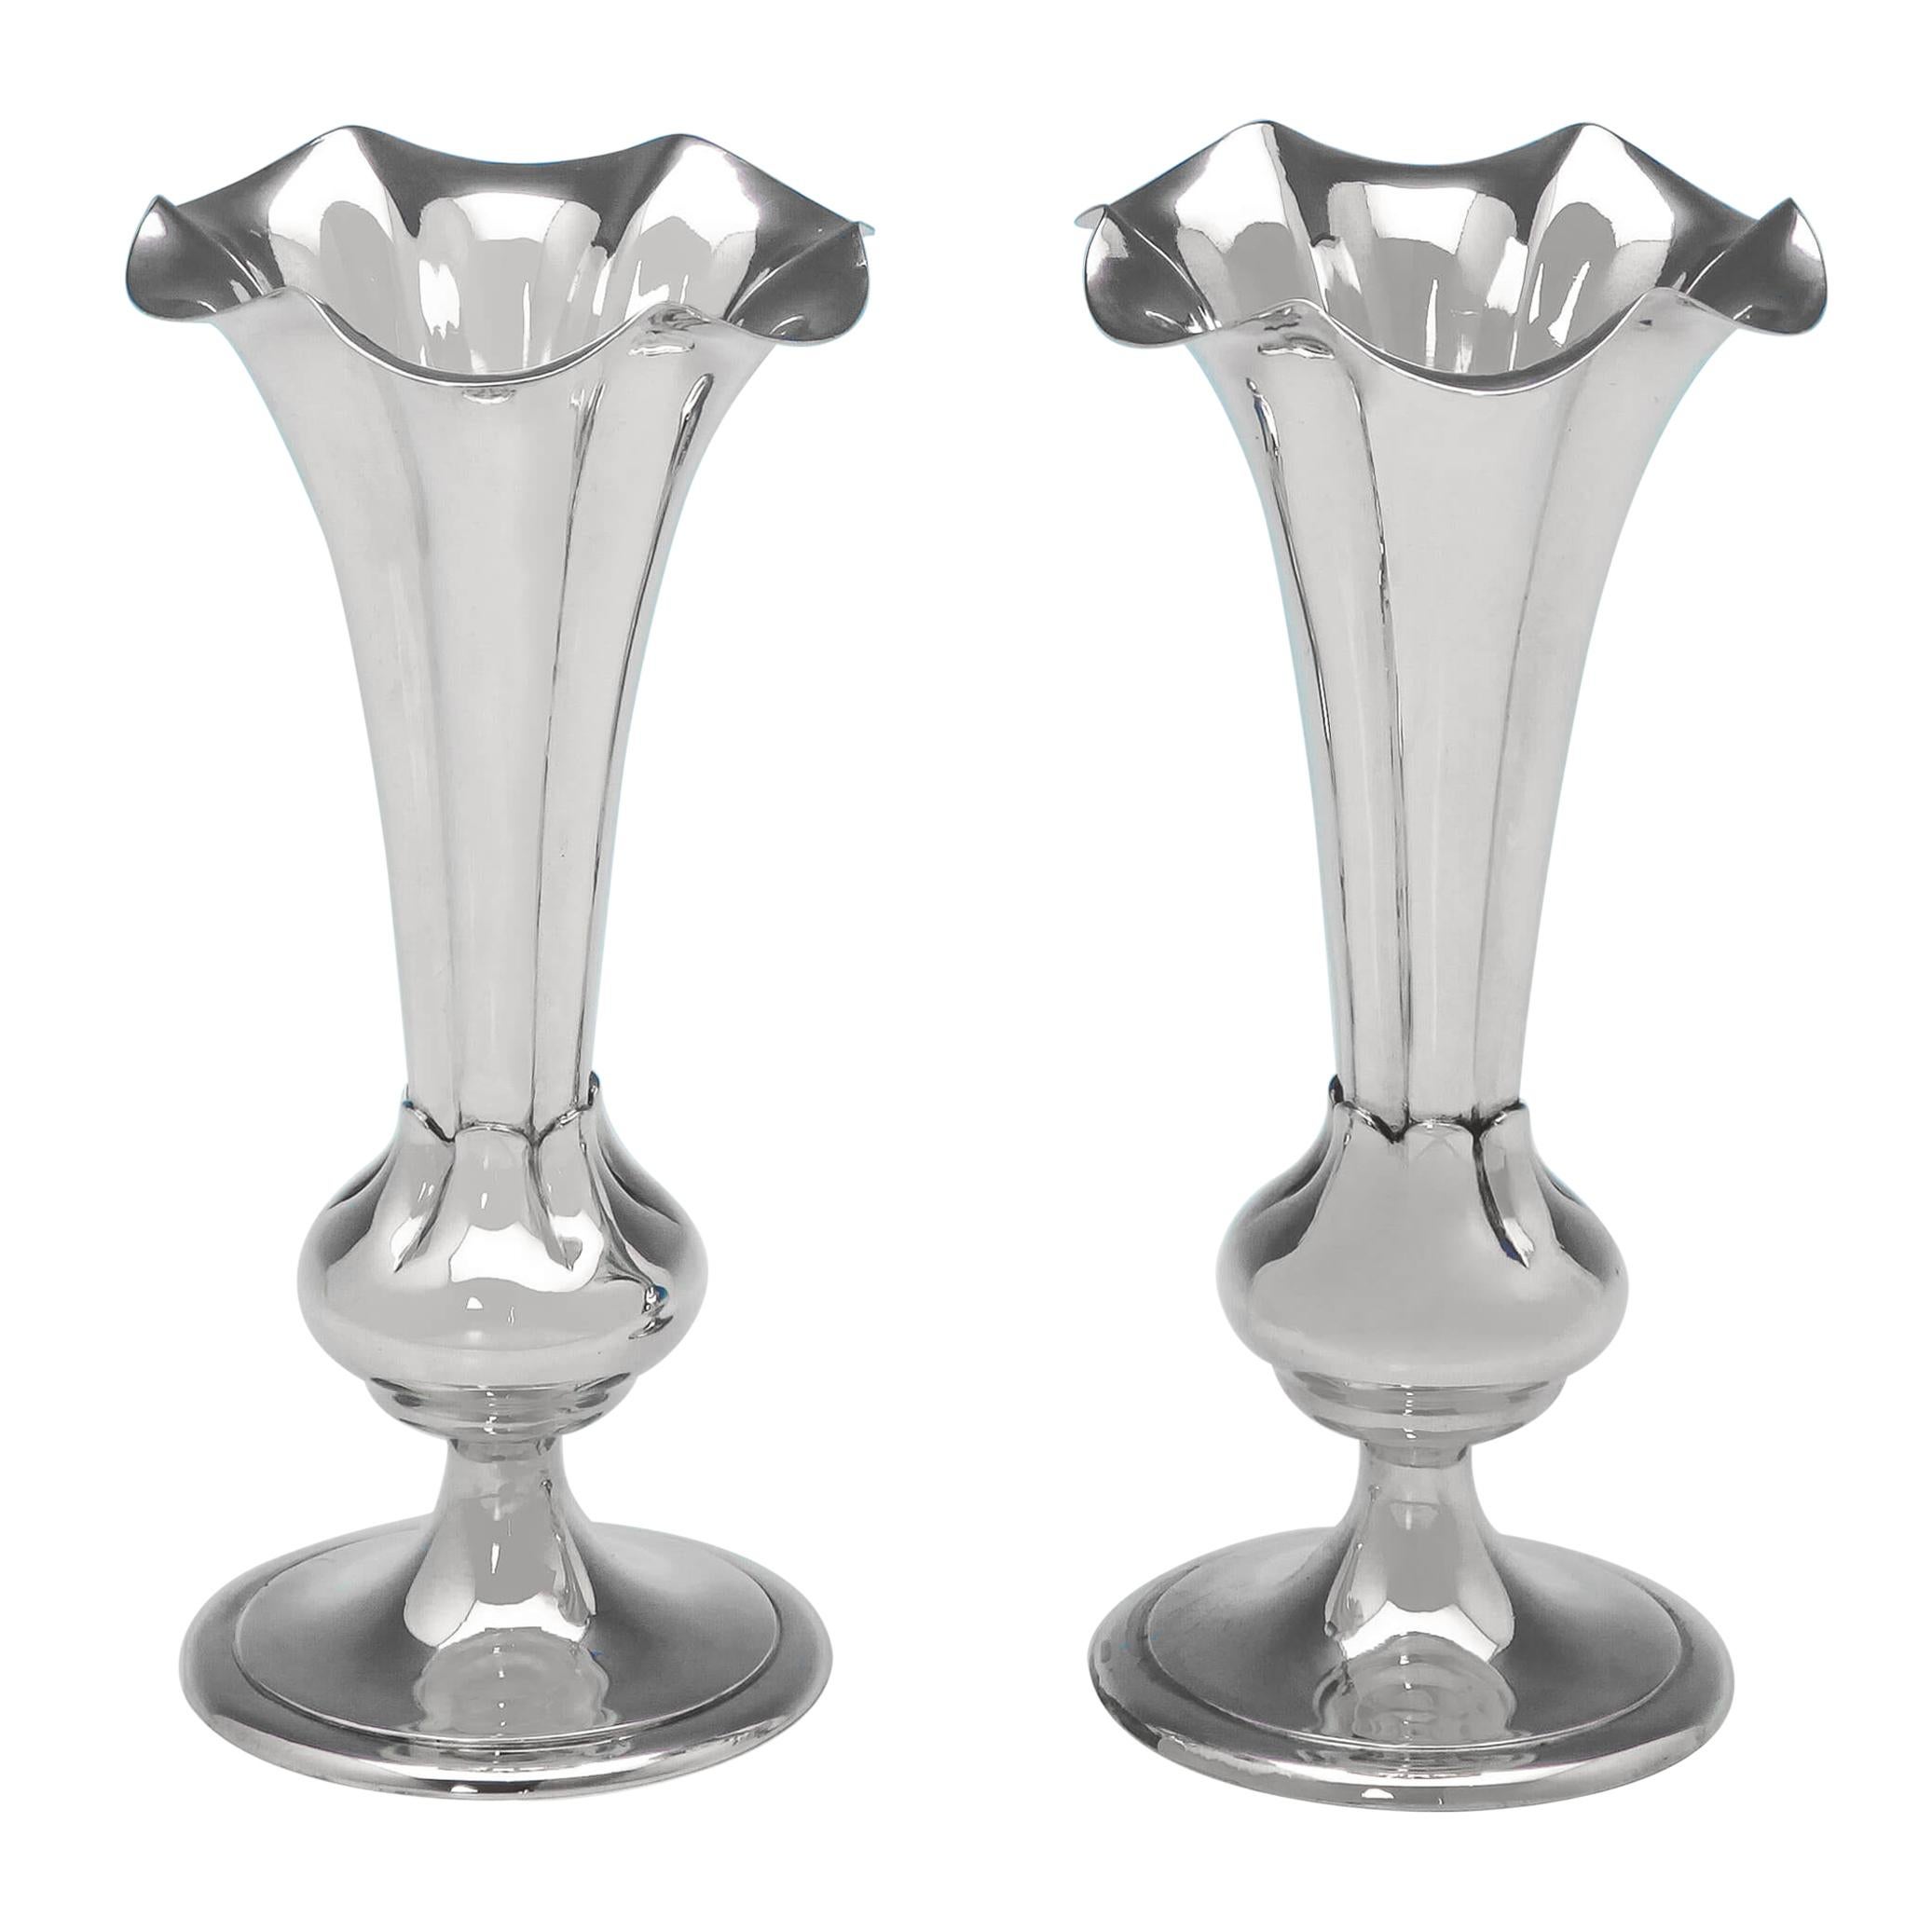 Victorian Antique Sterling Silver Pair of Vases by Elkington & Co. In 1899